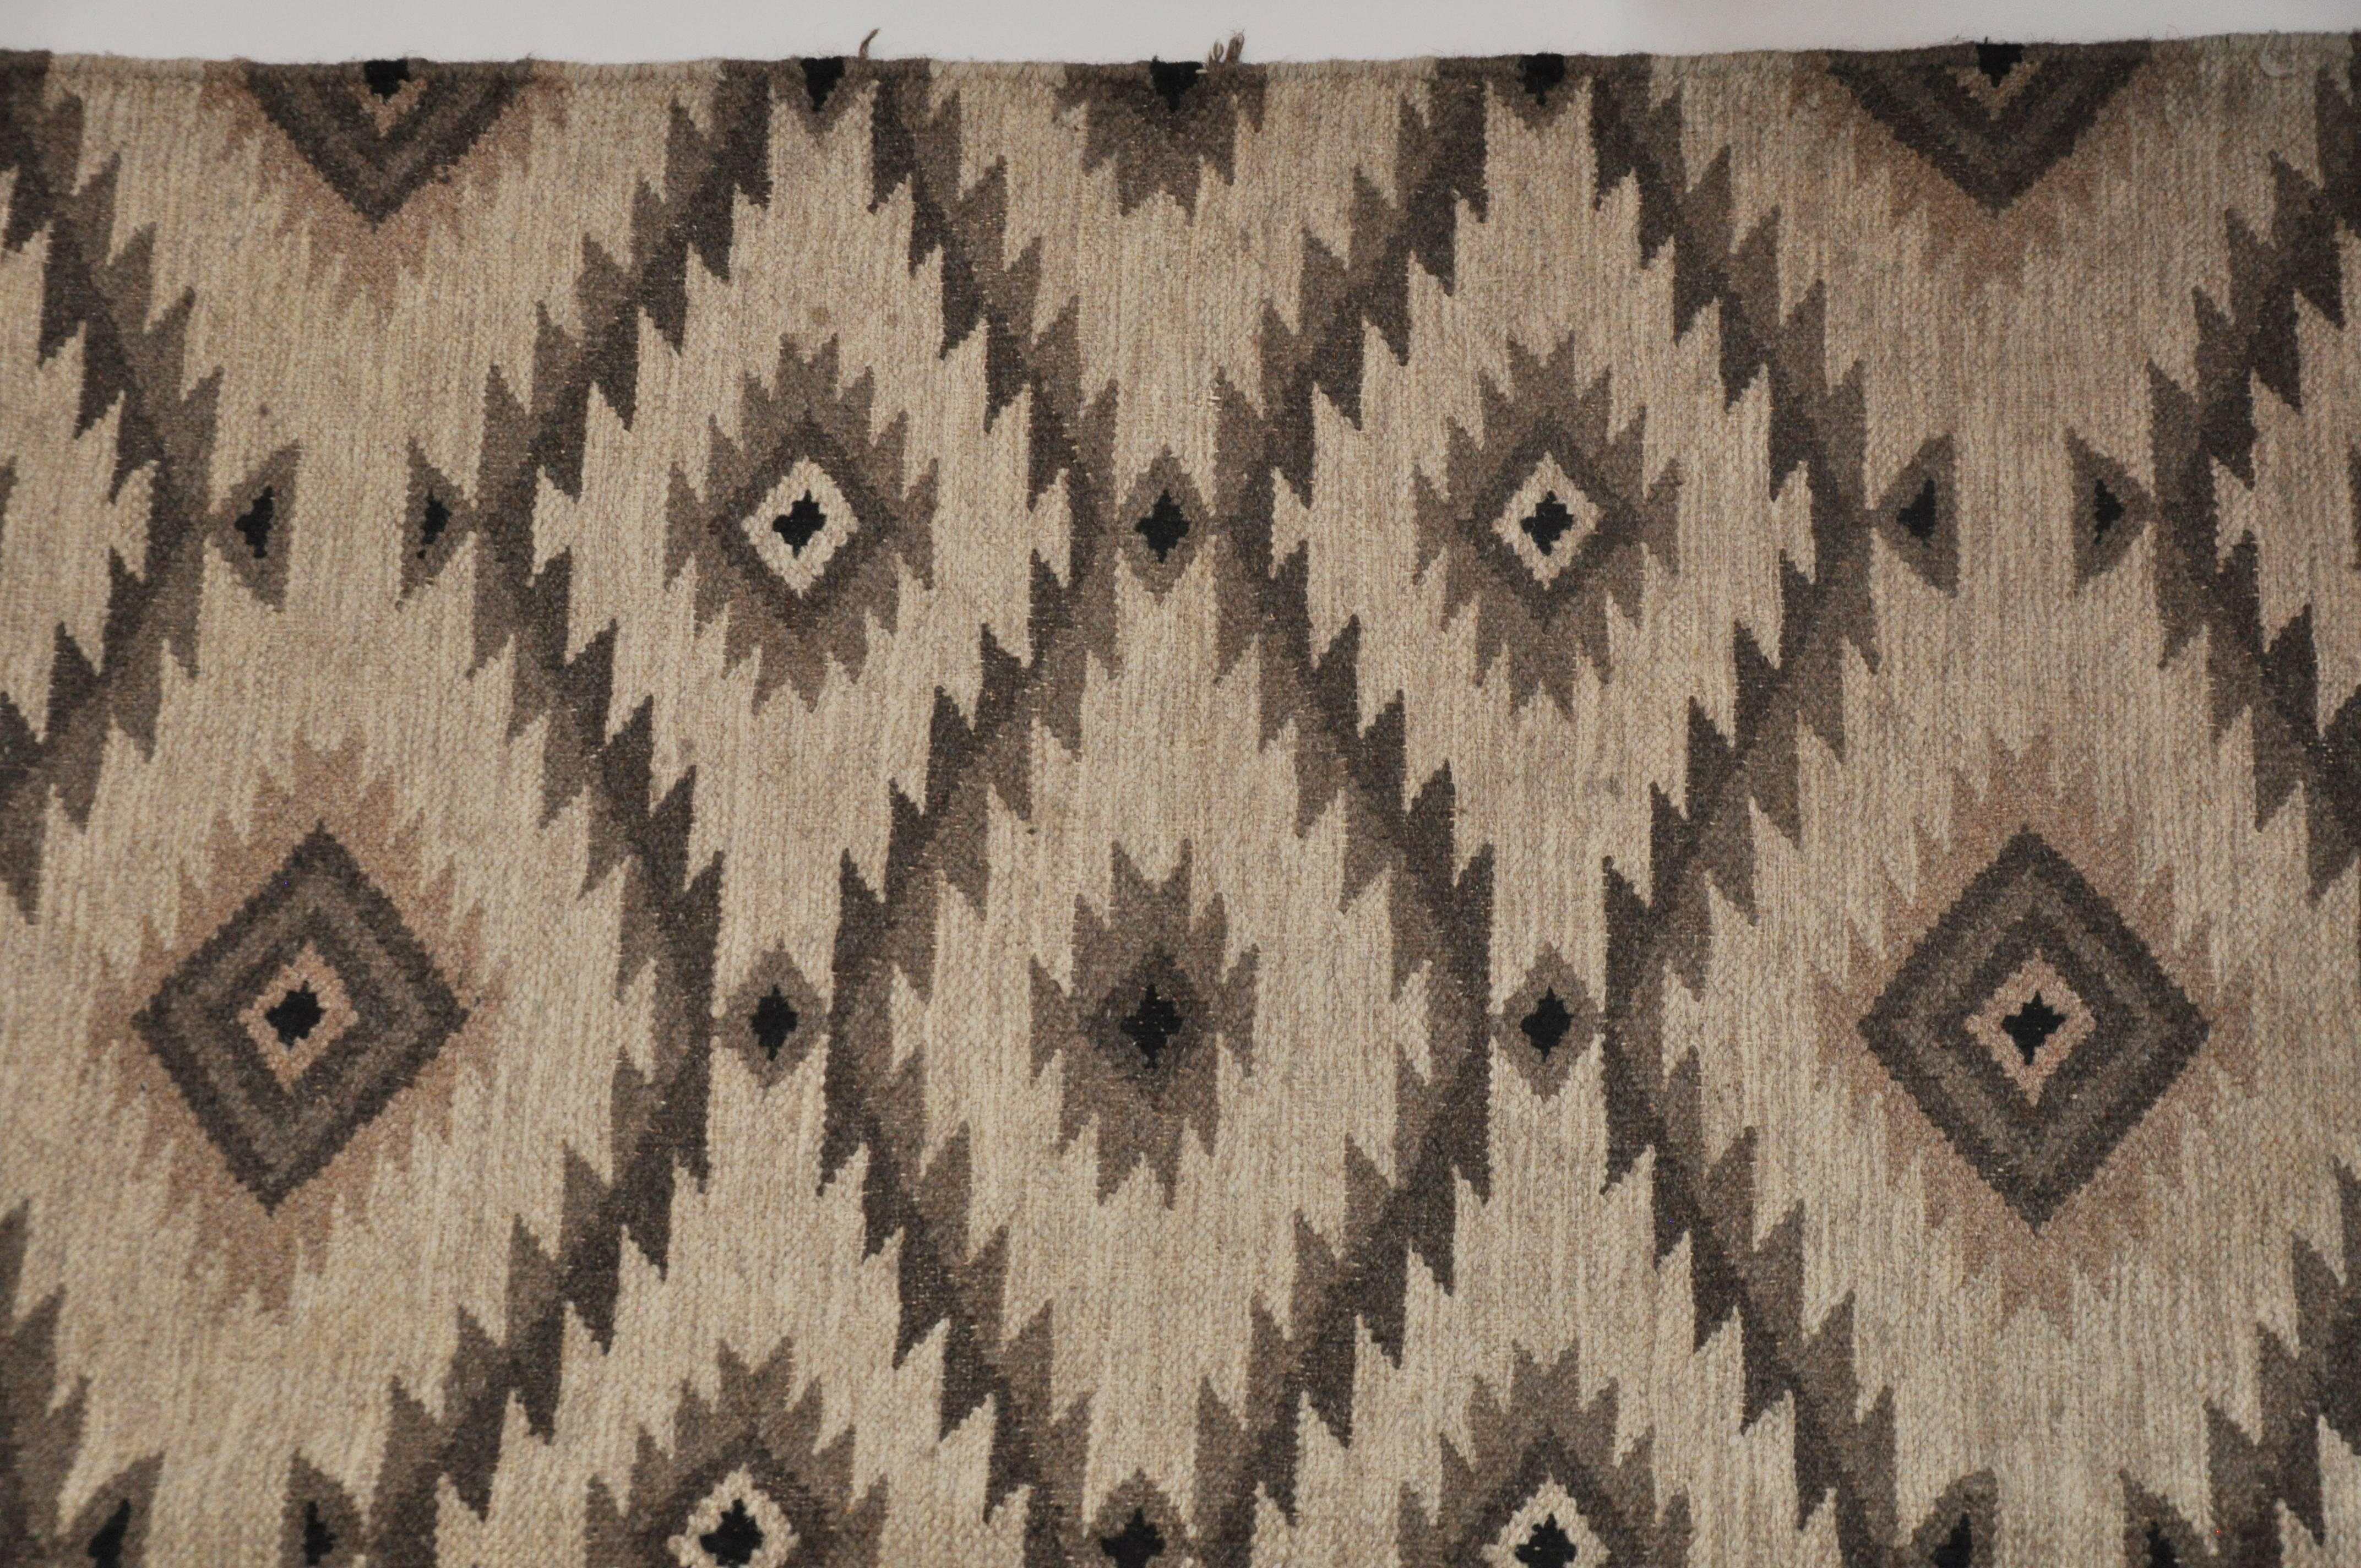 Mexican Mid-20th Century Pair of Zapotec Rugs